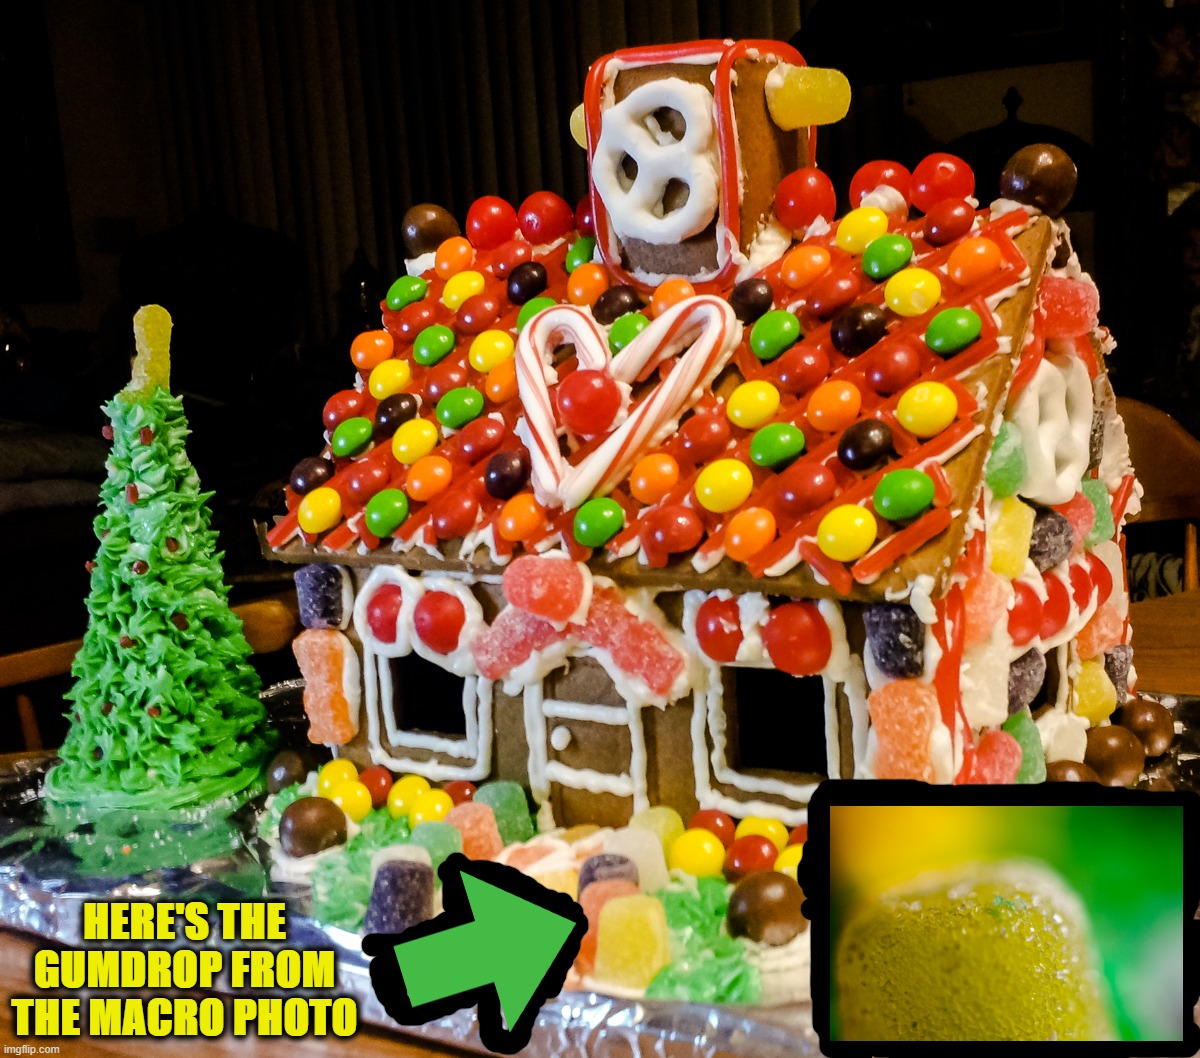 Just so you can see how little that gumdrop is | HERE'S THE GUMDROP FROM THE MACRO PHOTO | image tagged in original photography,gingerbread house,gumdrop,macro | made w/ Imgflip meme maker